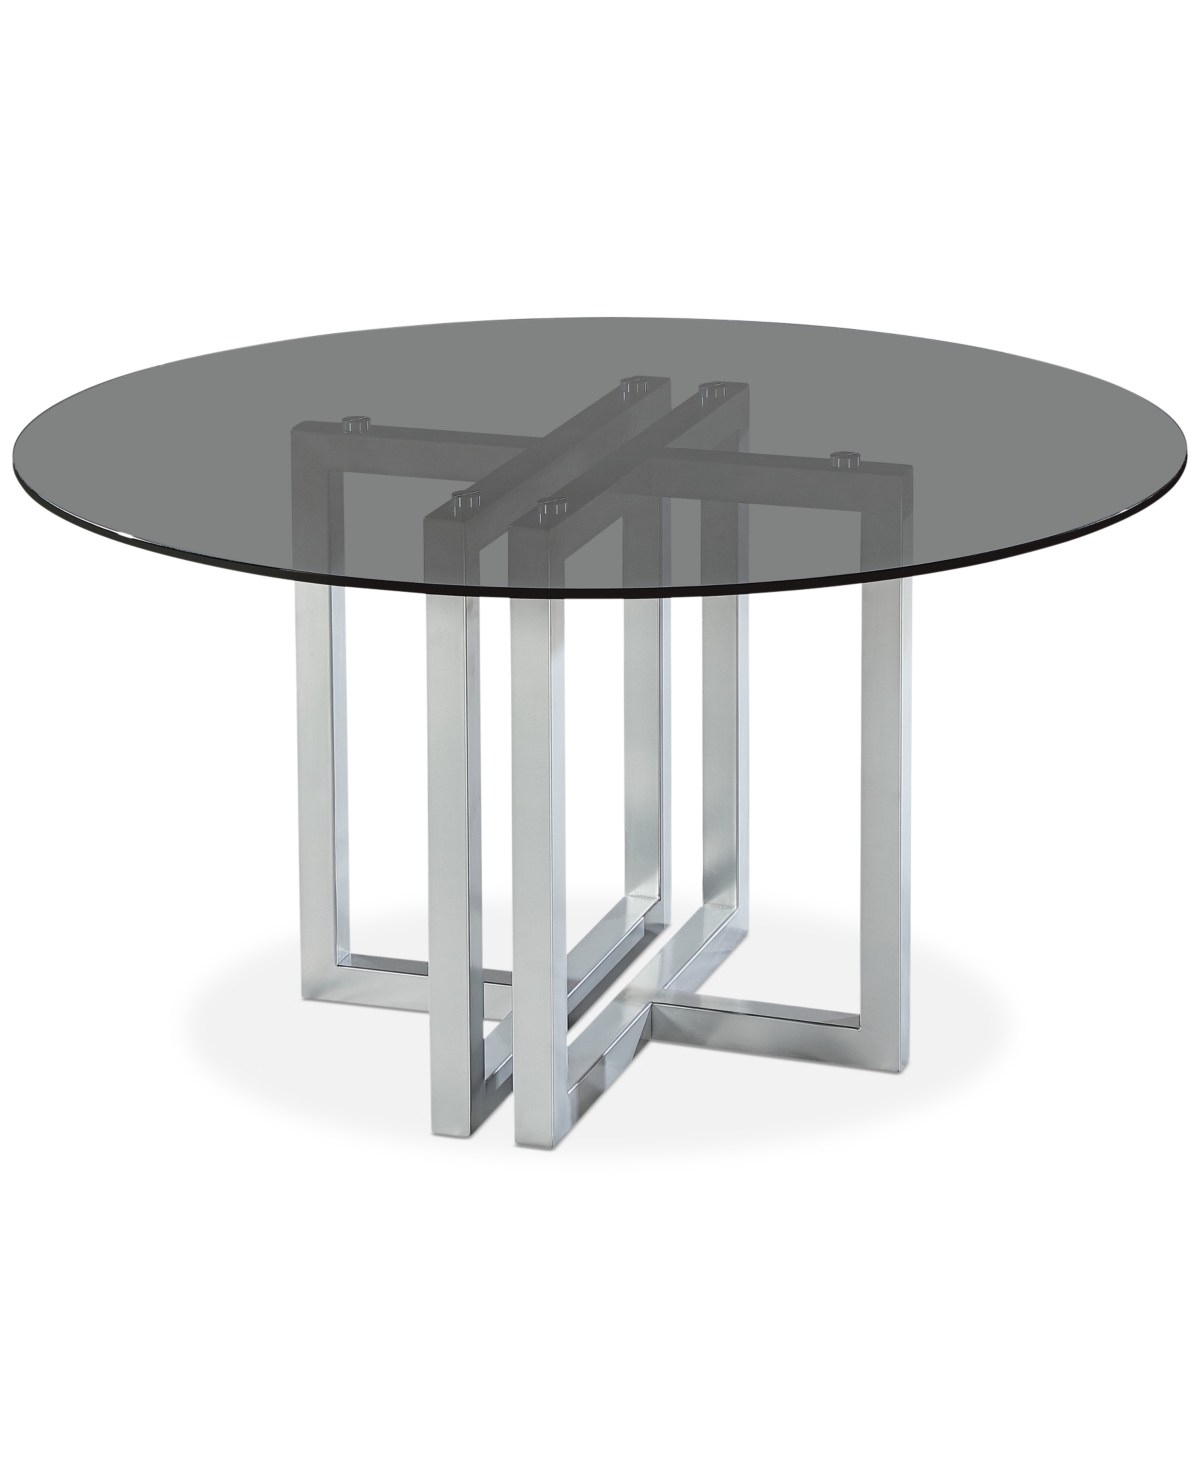 Furniture Emila 54" Round Glass Mix And Match Dining Table, Created For Macy's In Smoked Glass With Silver Base